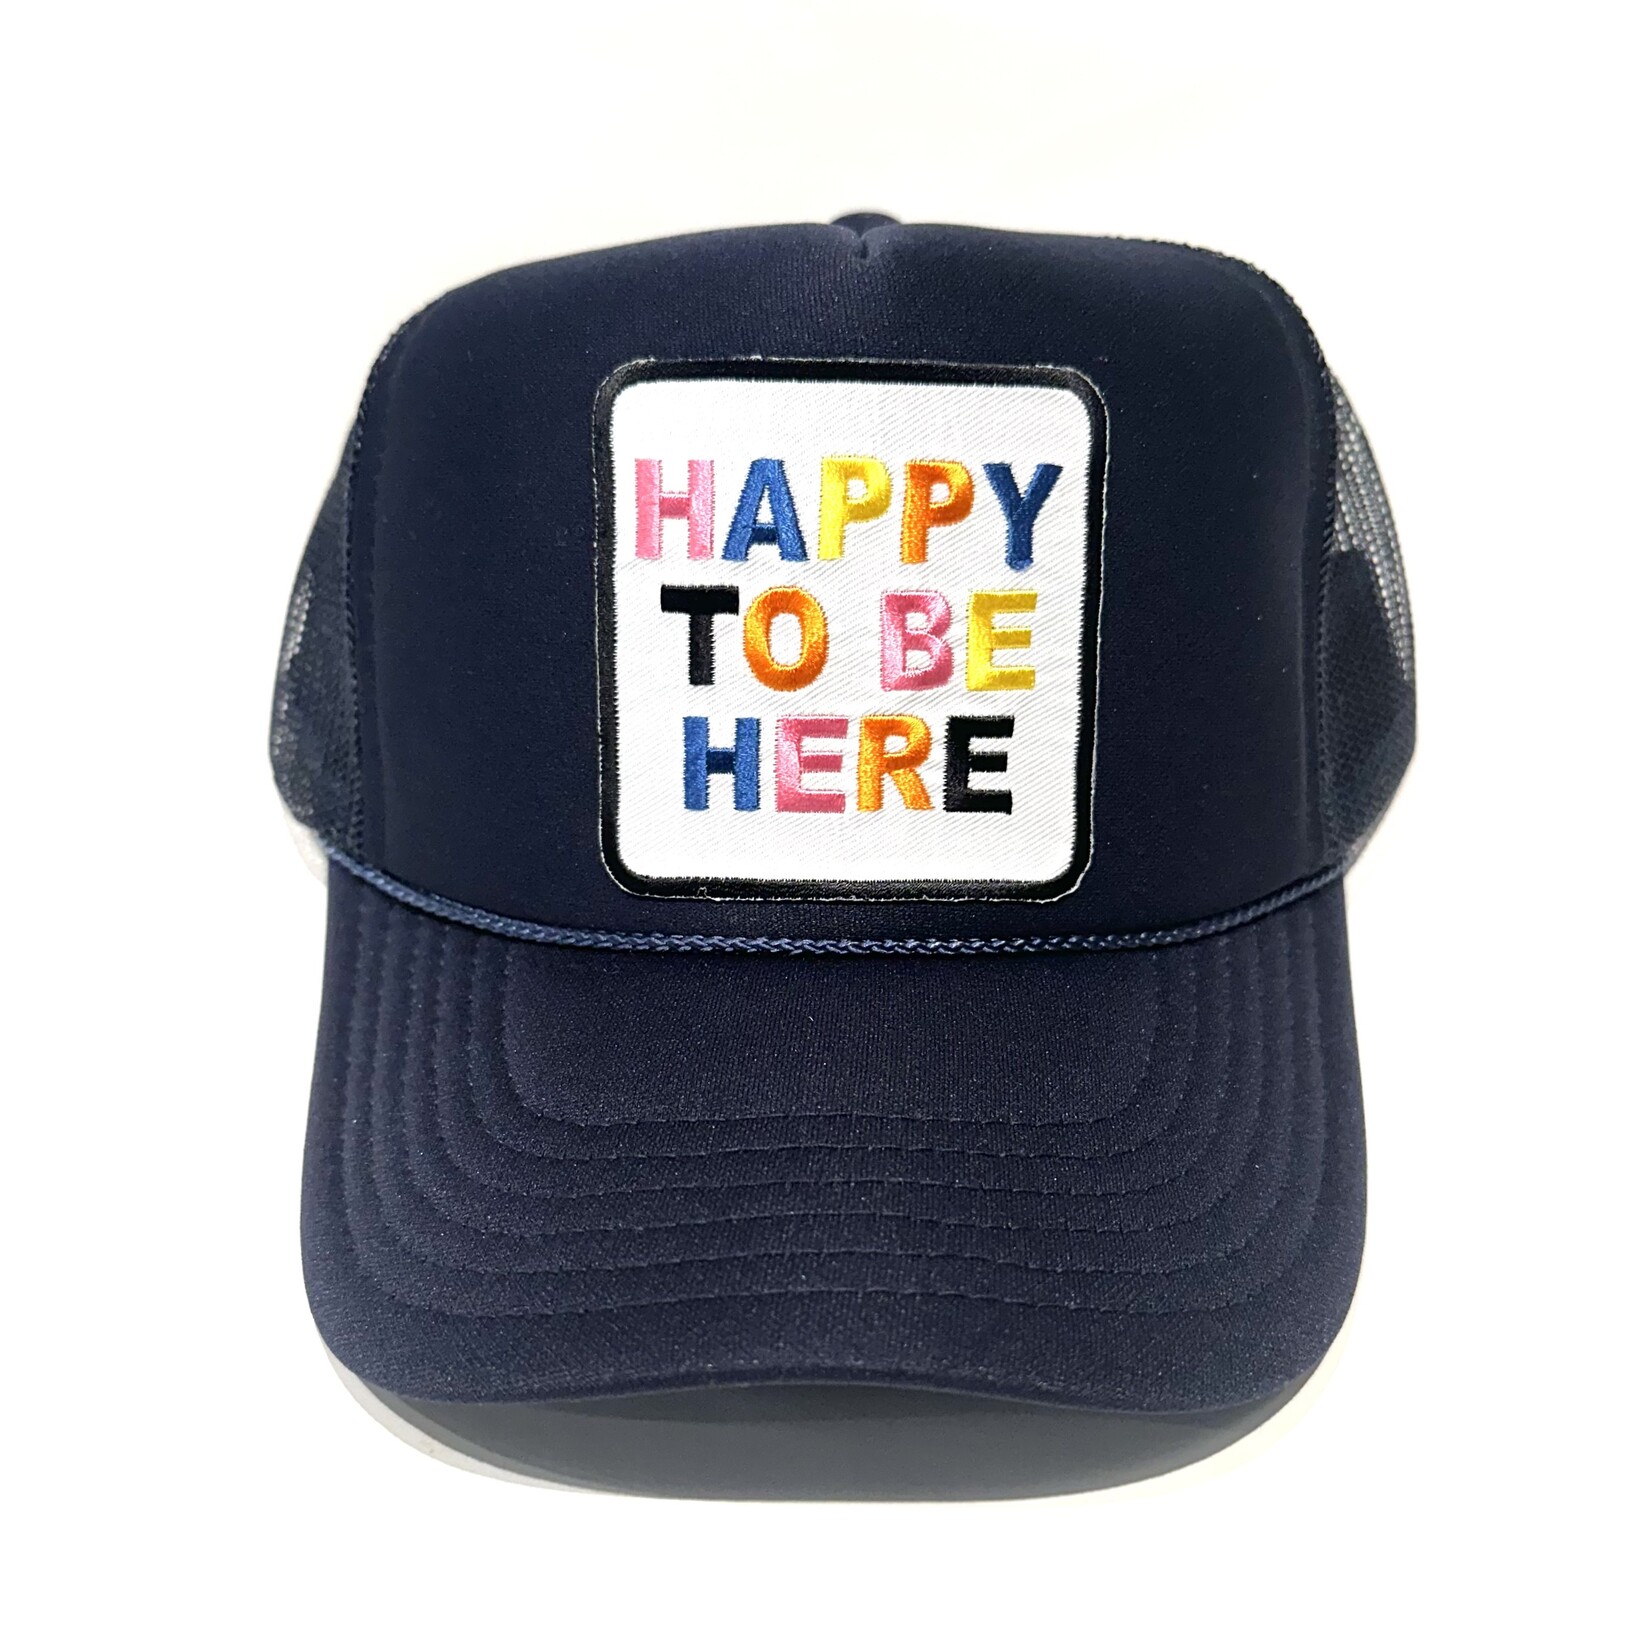 Après Babe “Happy to be here” Trucker Hats